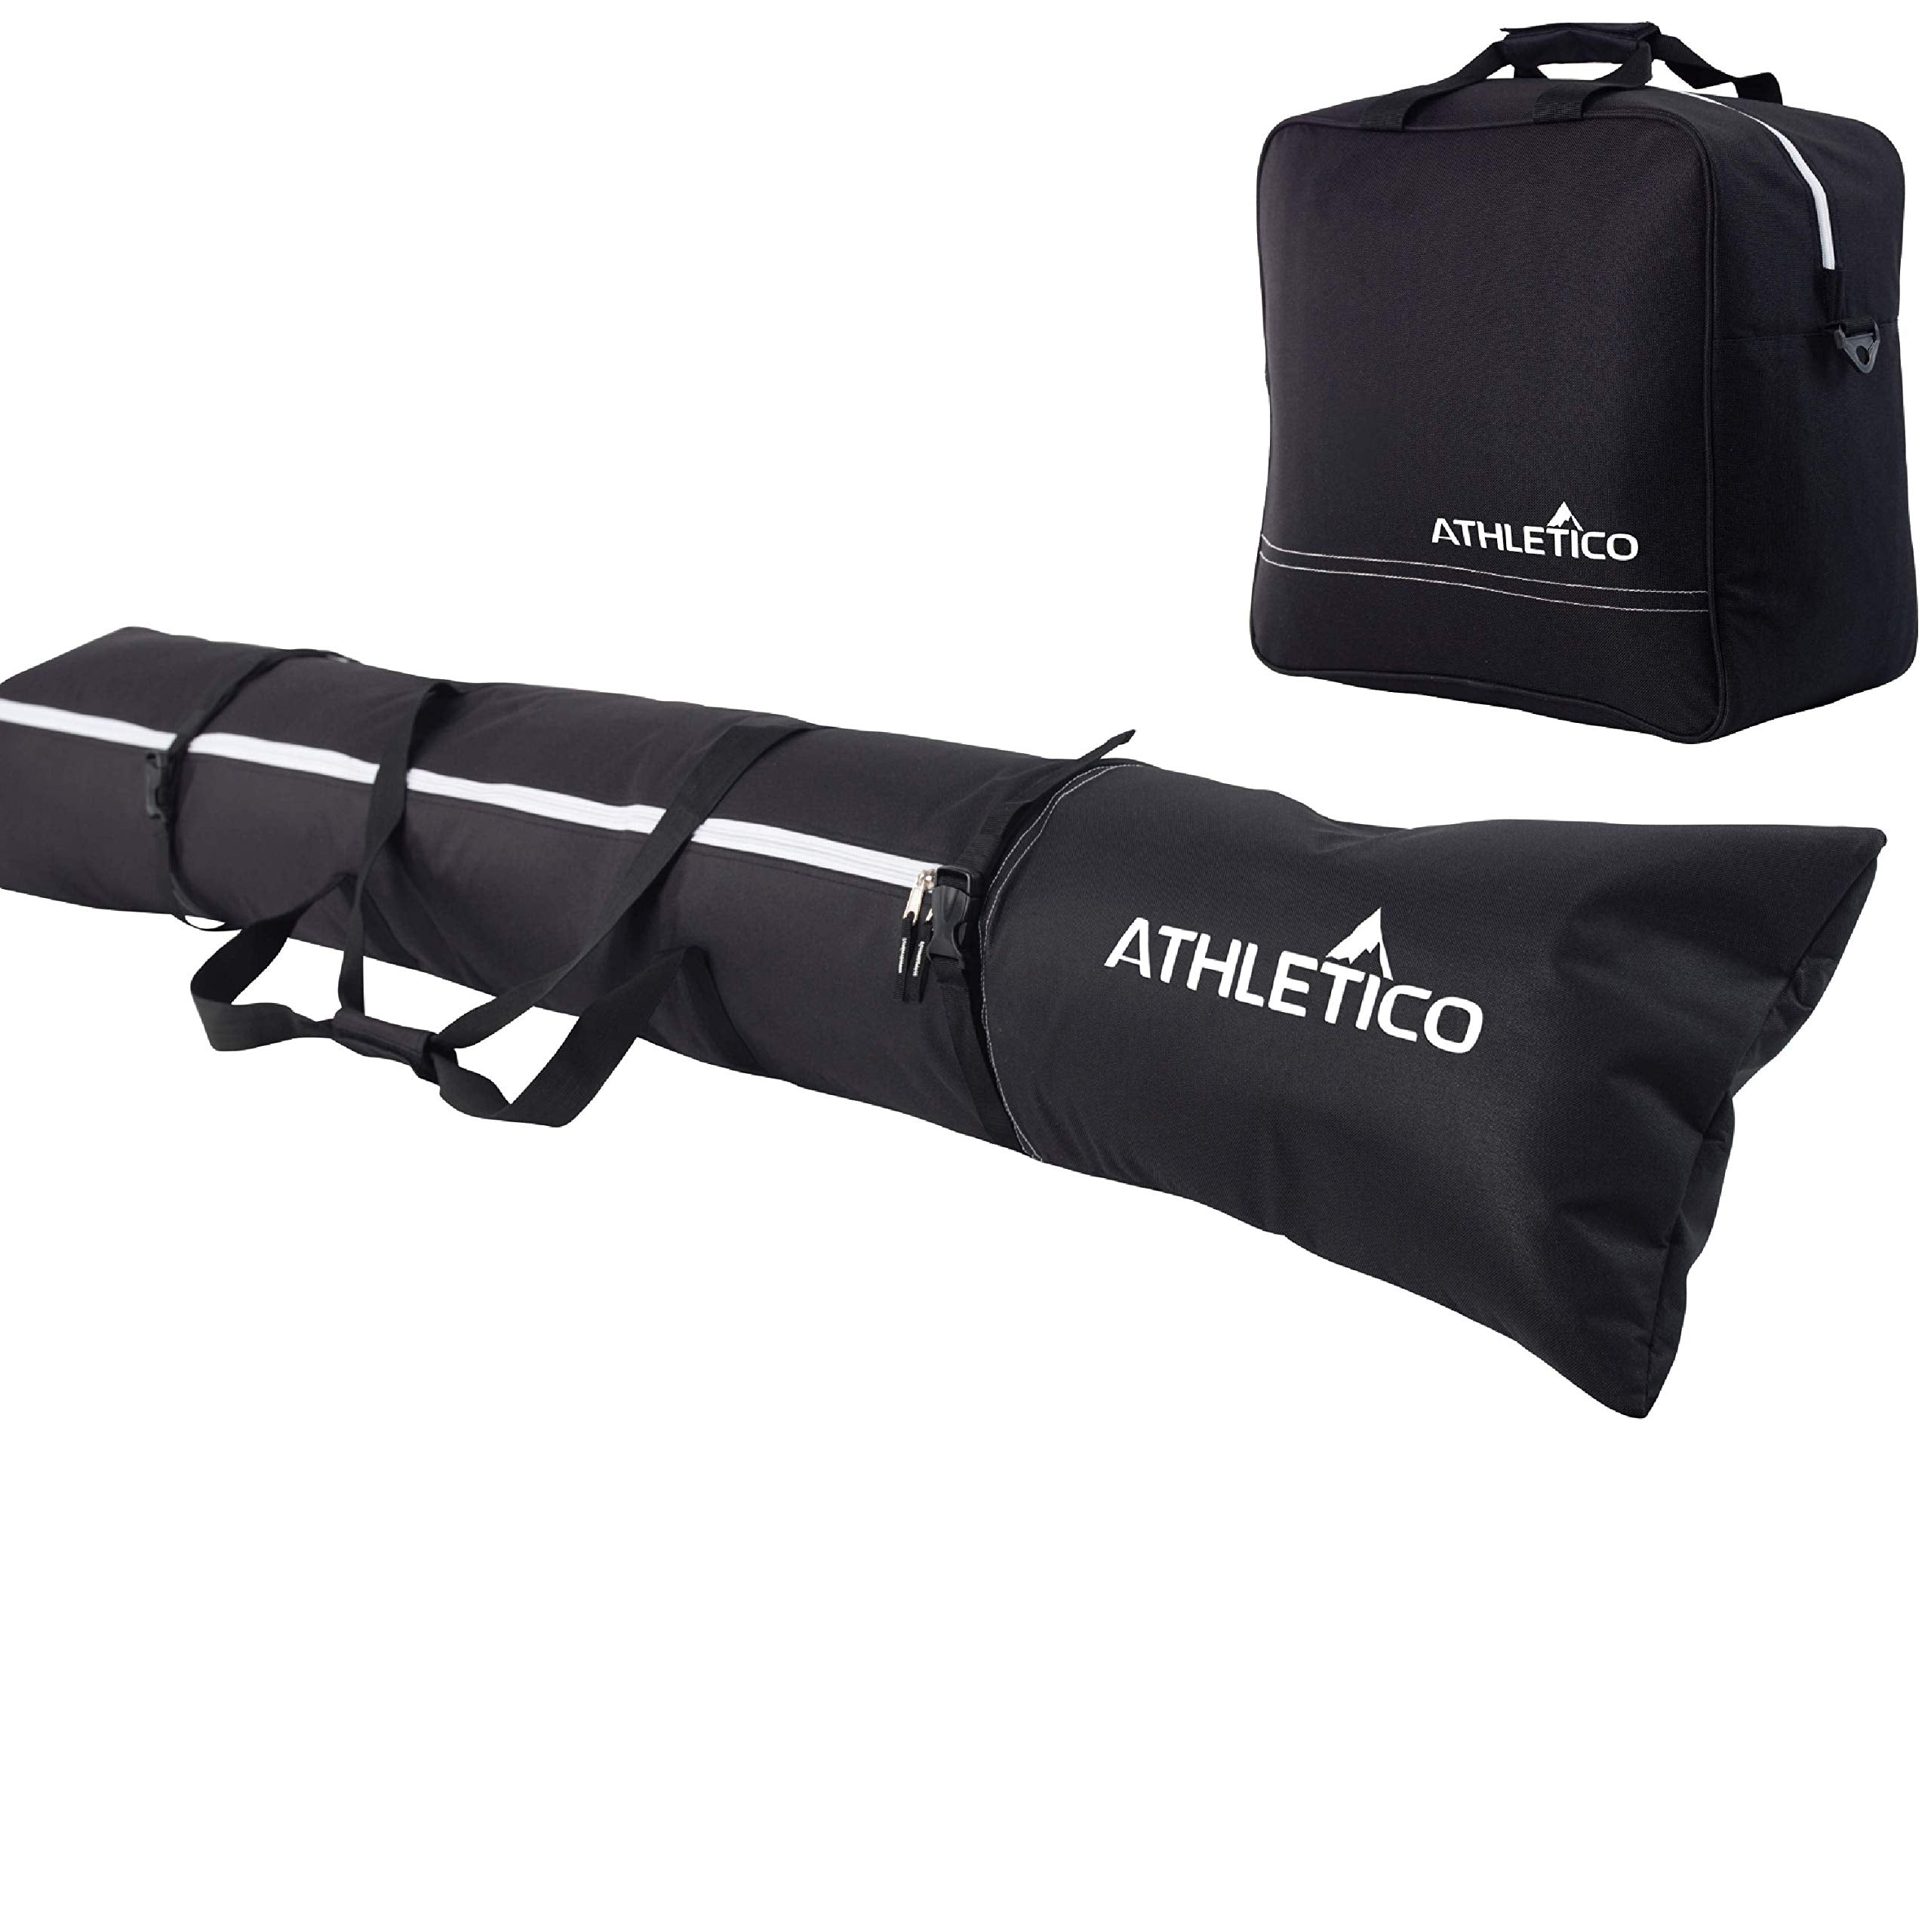 Athletico Padded Ski Bag Combo - Ski Bag & Separate Boot Bag - Store & Transport Skis Up to 200 CM and Boots Up To Size 13 - Padded to Protect All Your Ski Gear and Equipment for Travel (Black)  - Acceptable